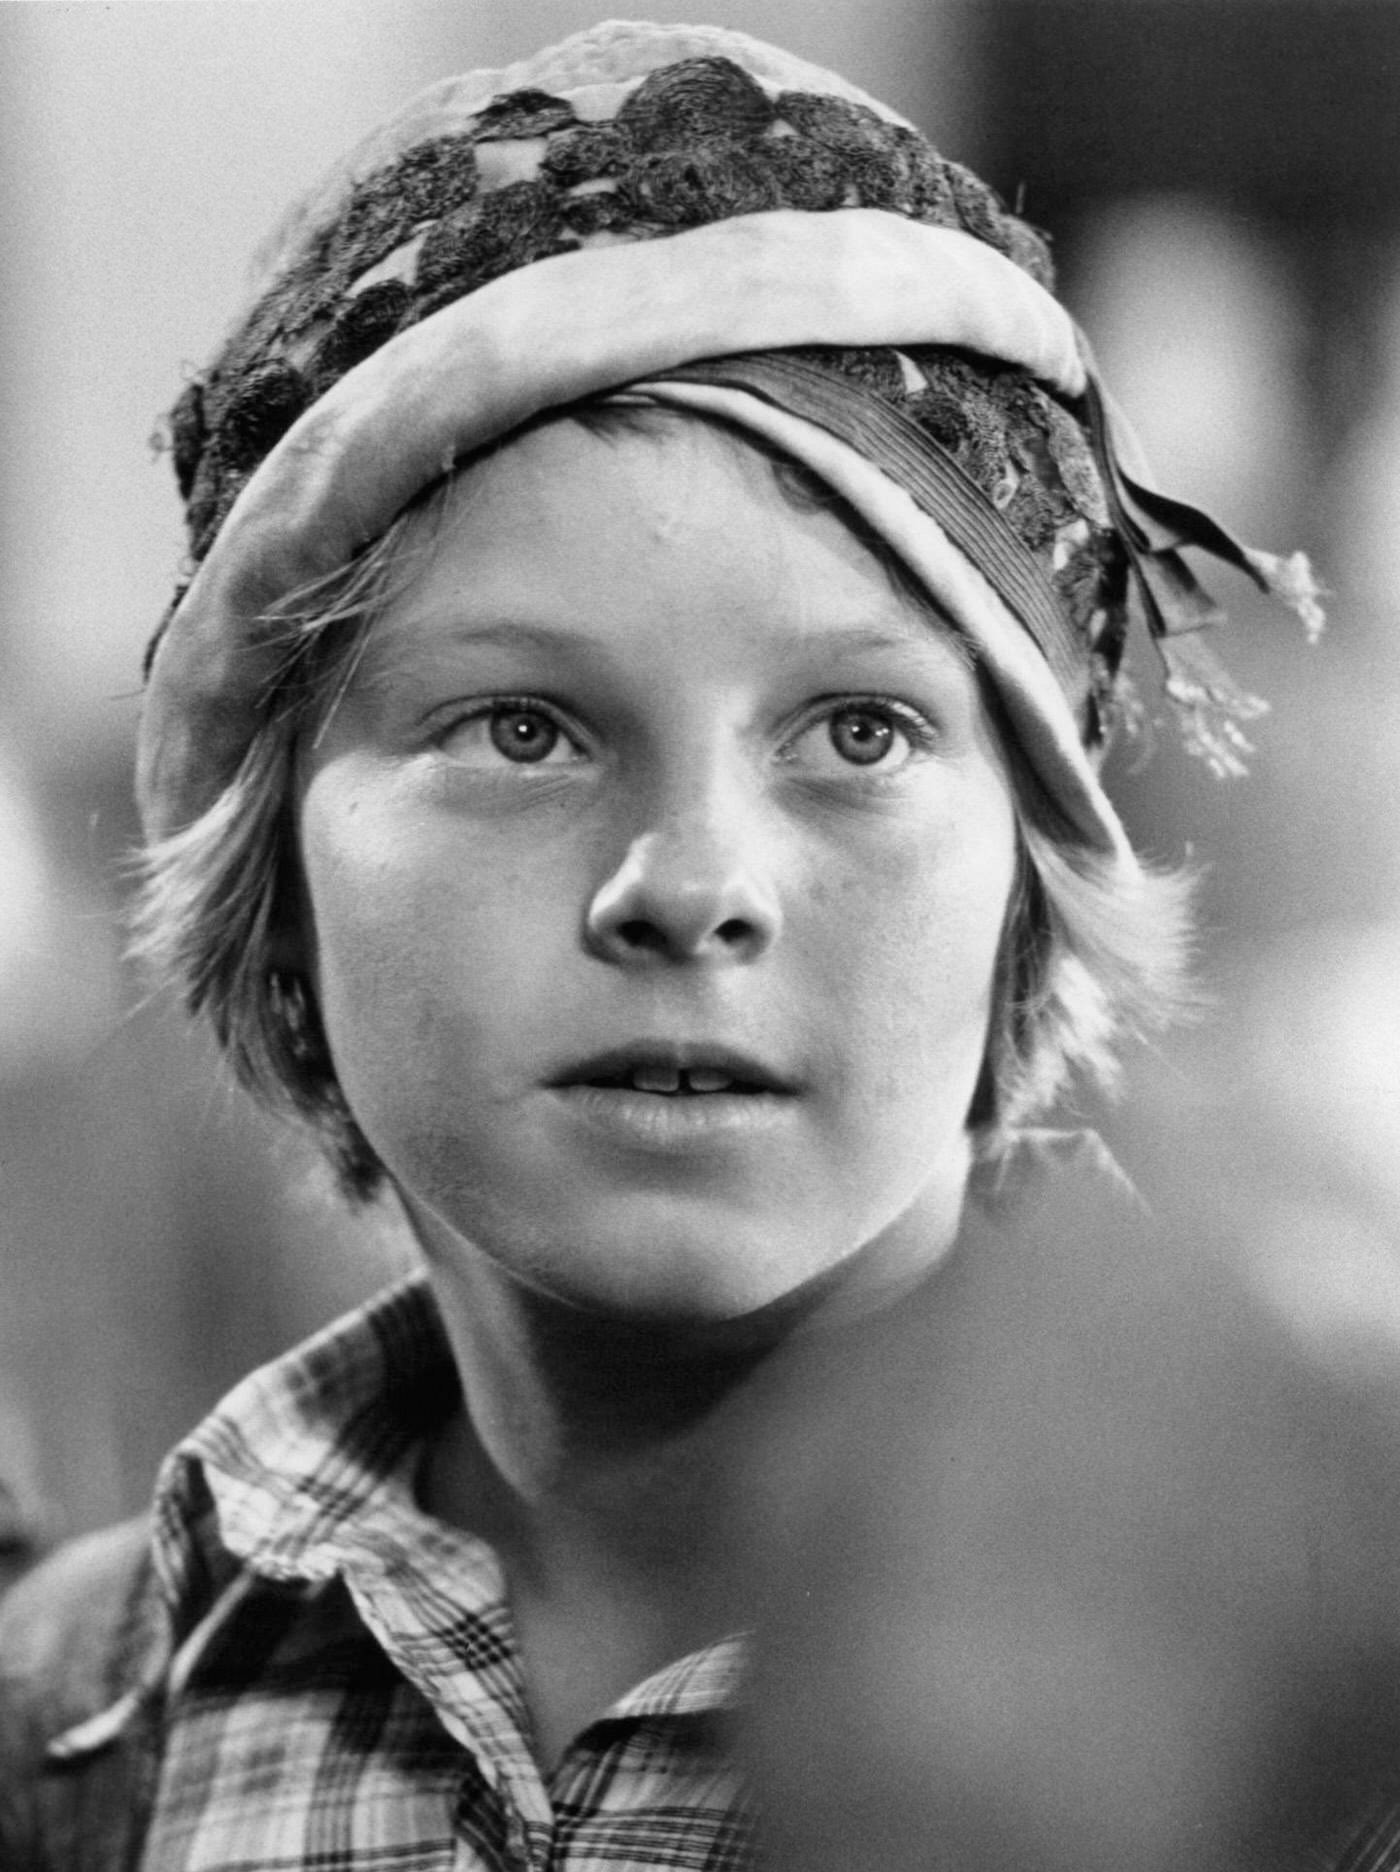 Jodie Foster looking left in a scene from 'Paper Moon', 1974.